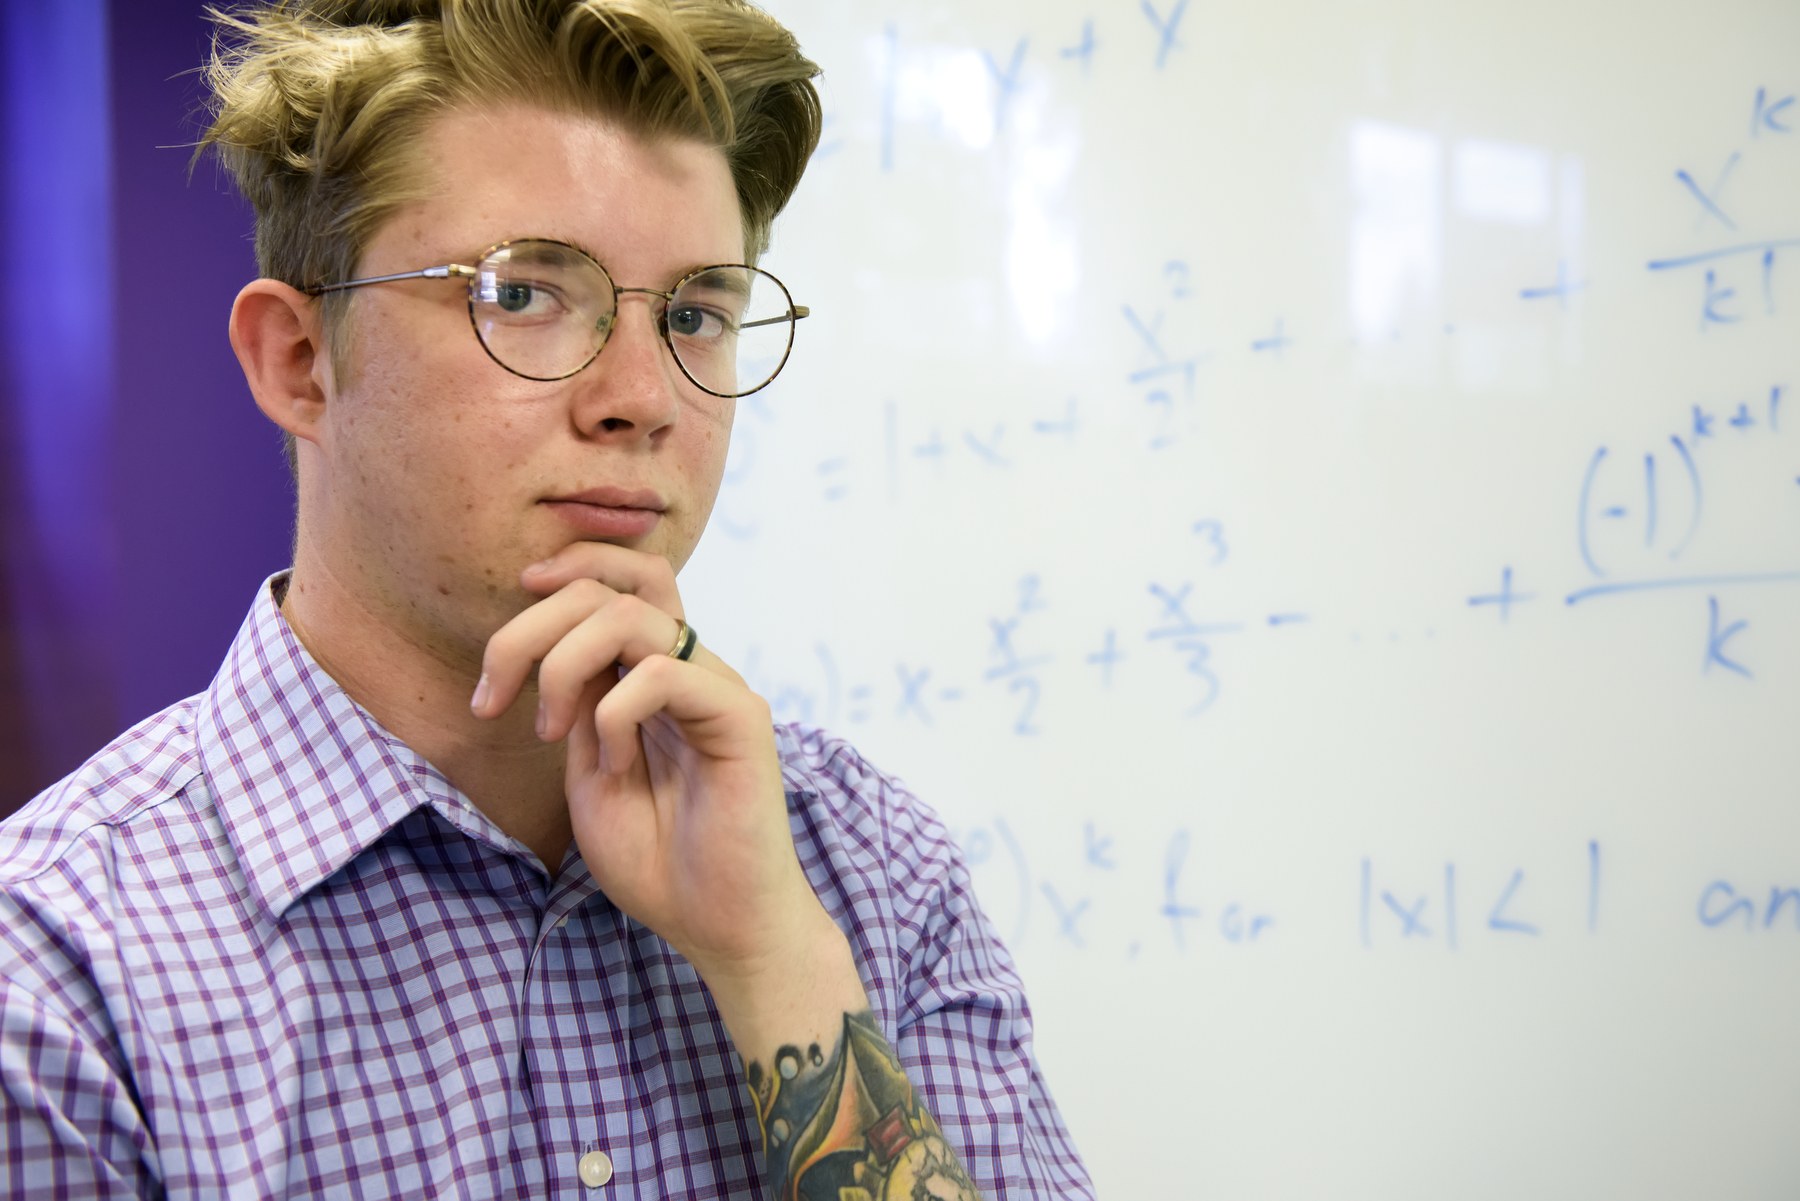 Math student ponders in front of a white board with math work